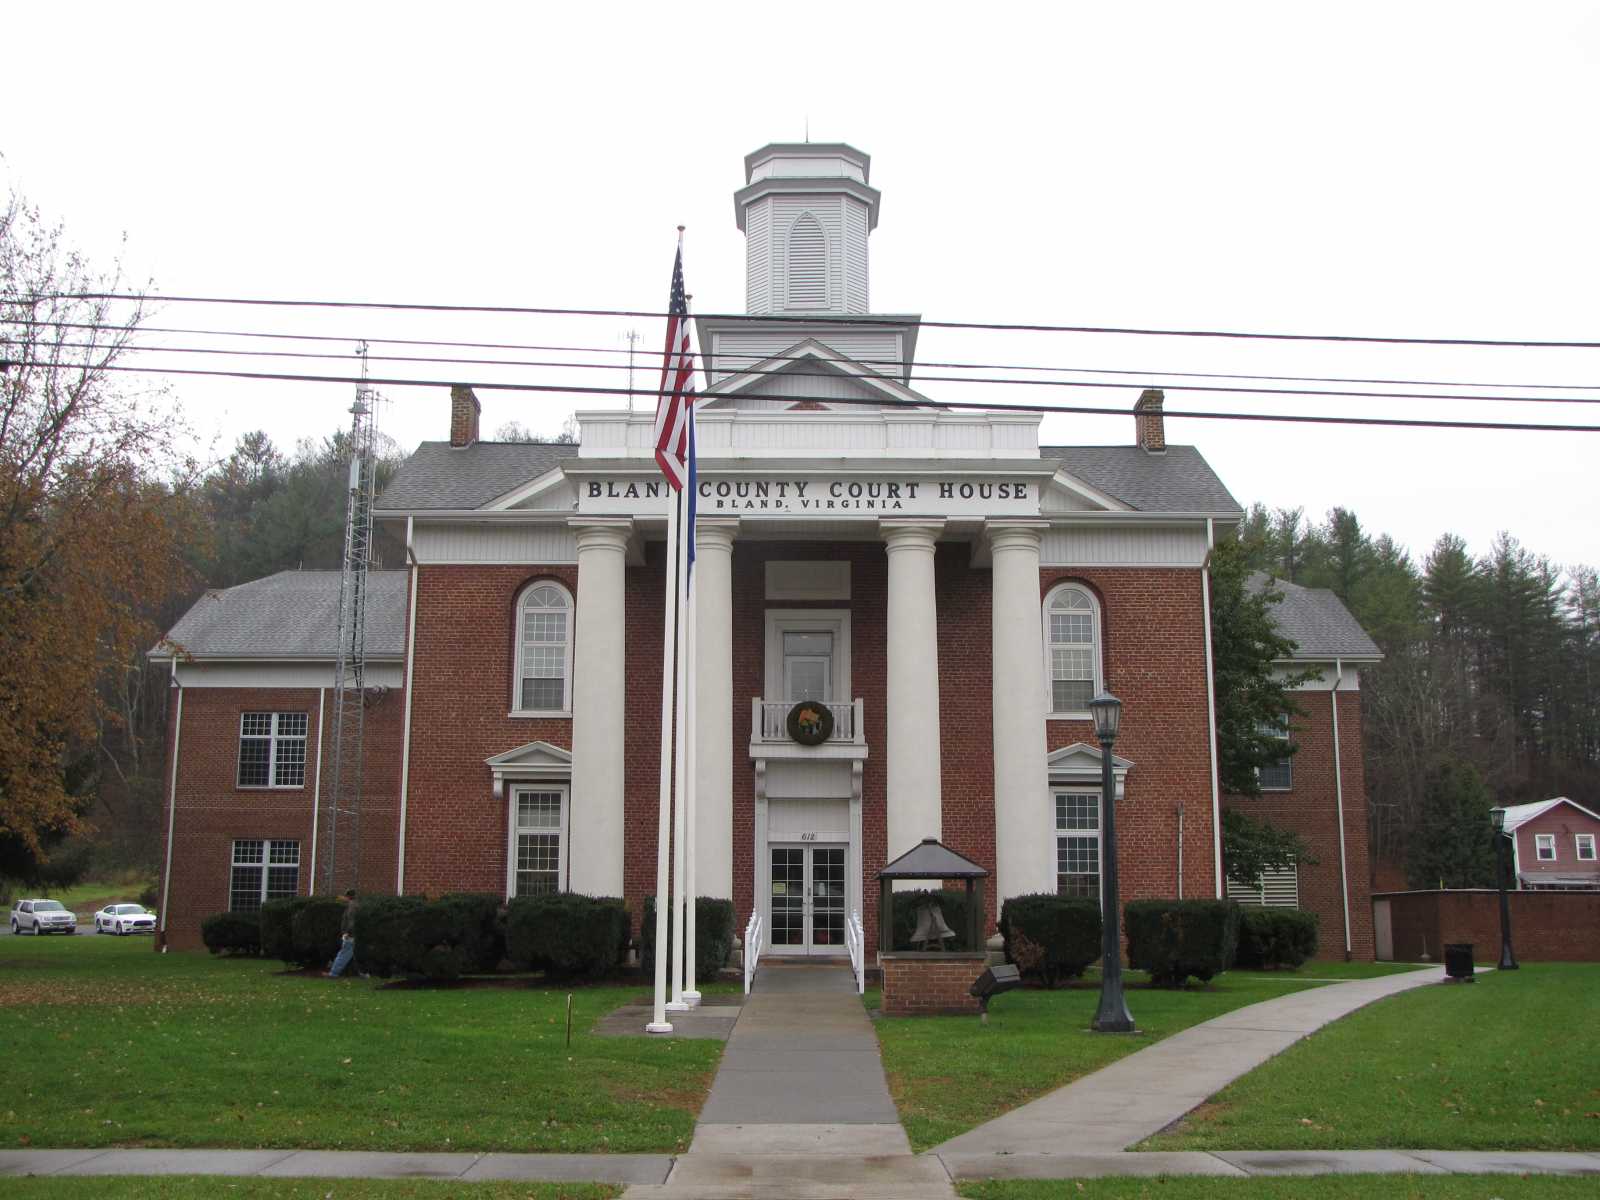 Image of Bland County court